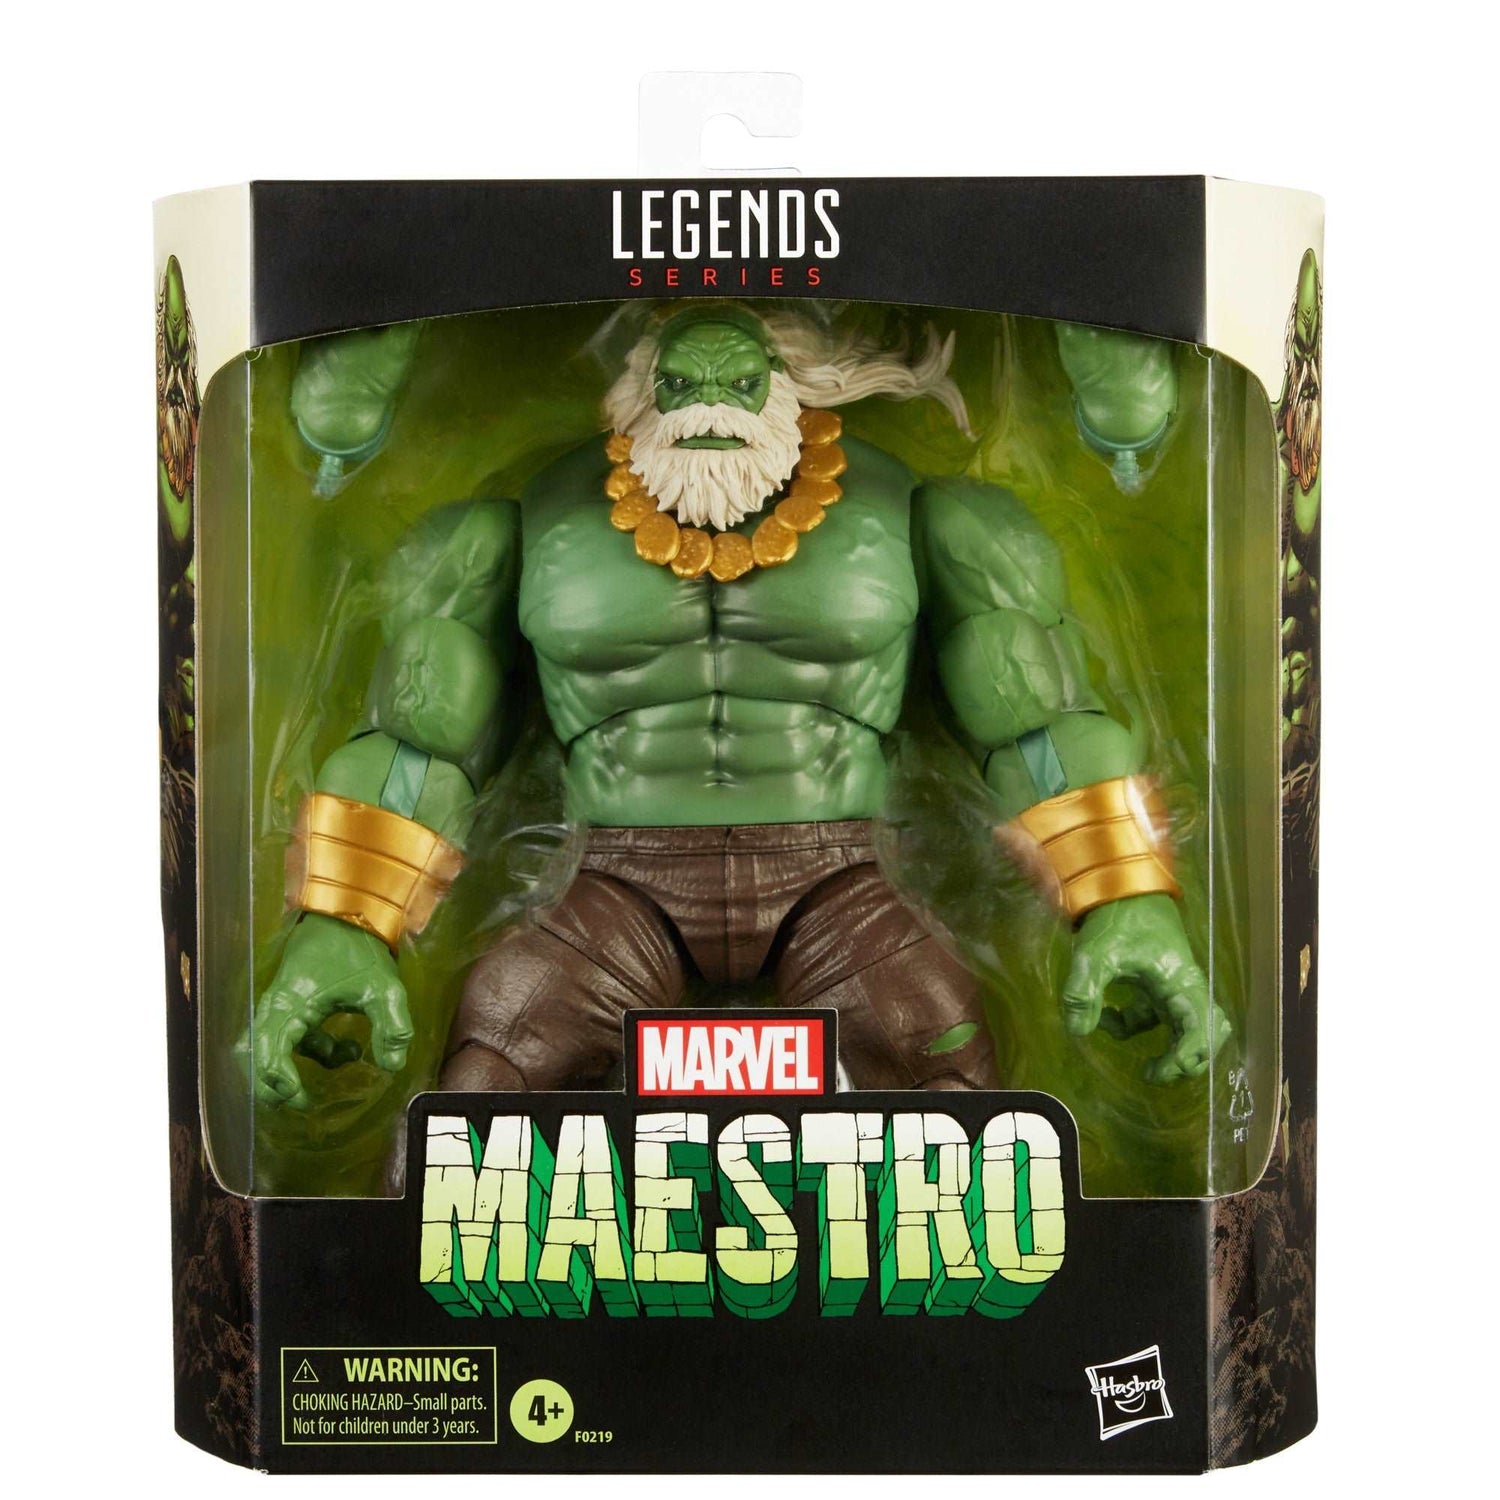 Marvel Legends Deluxe Maestro action figure front of box packaging